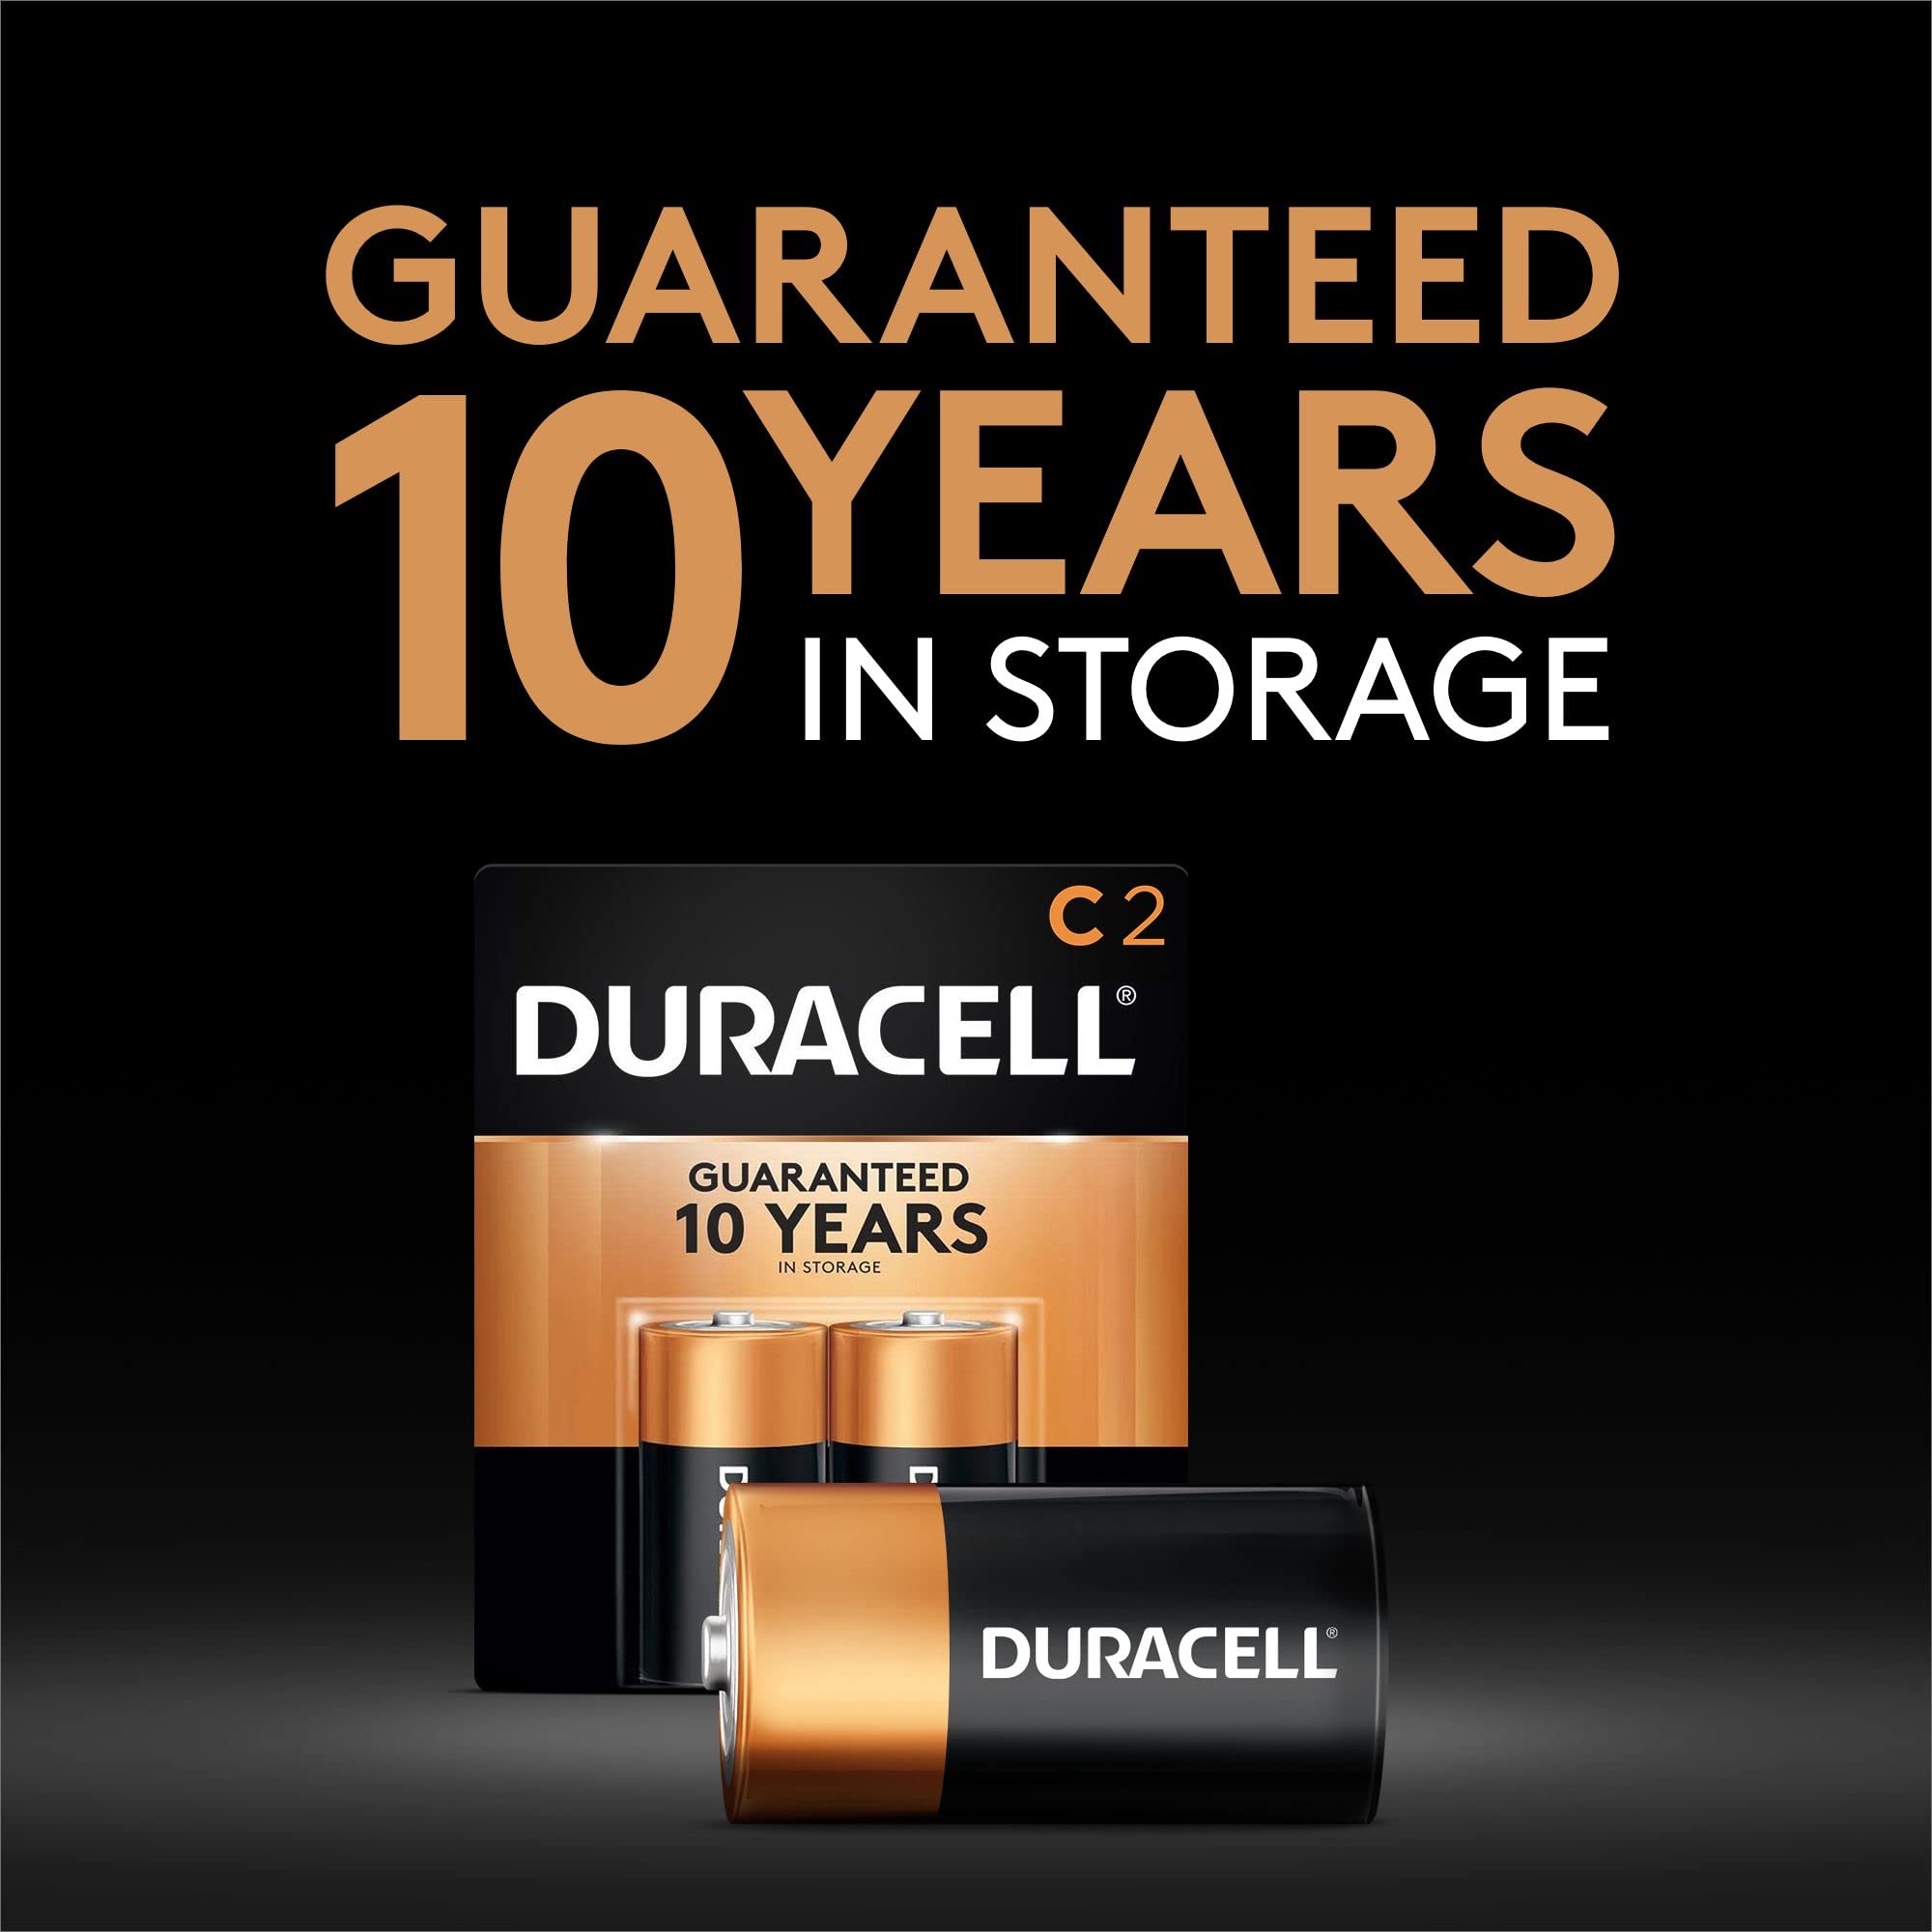 DURACELL Coppertop 1.5V Size C Alkaline Battery, (Pack of 3) - image 3 of 5